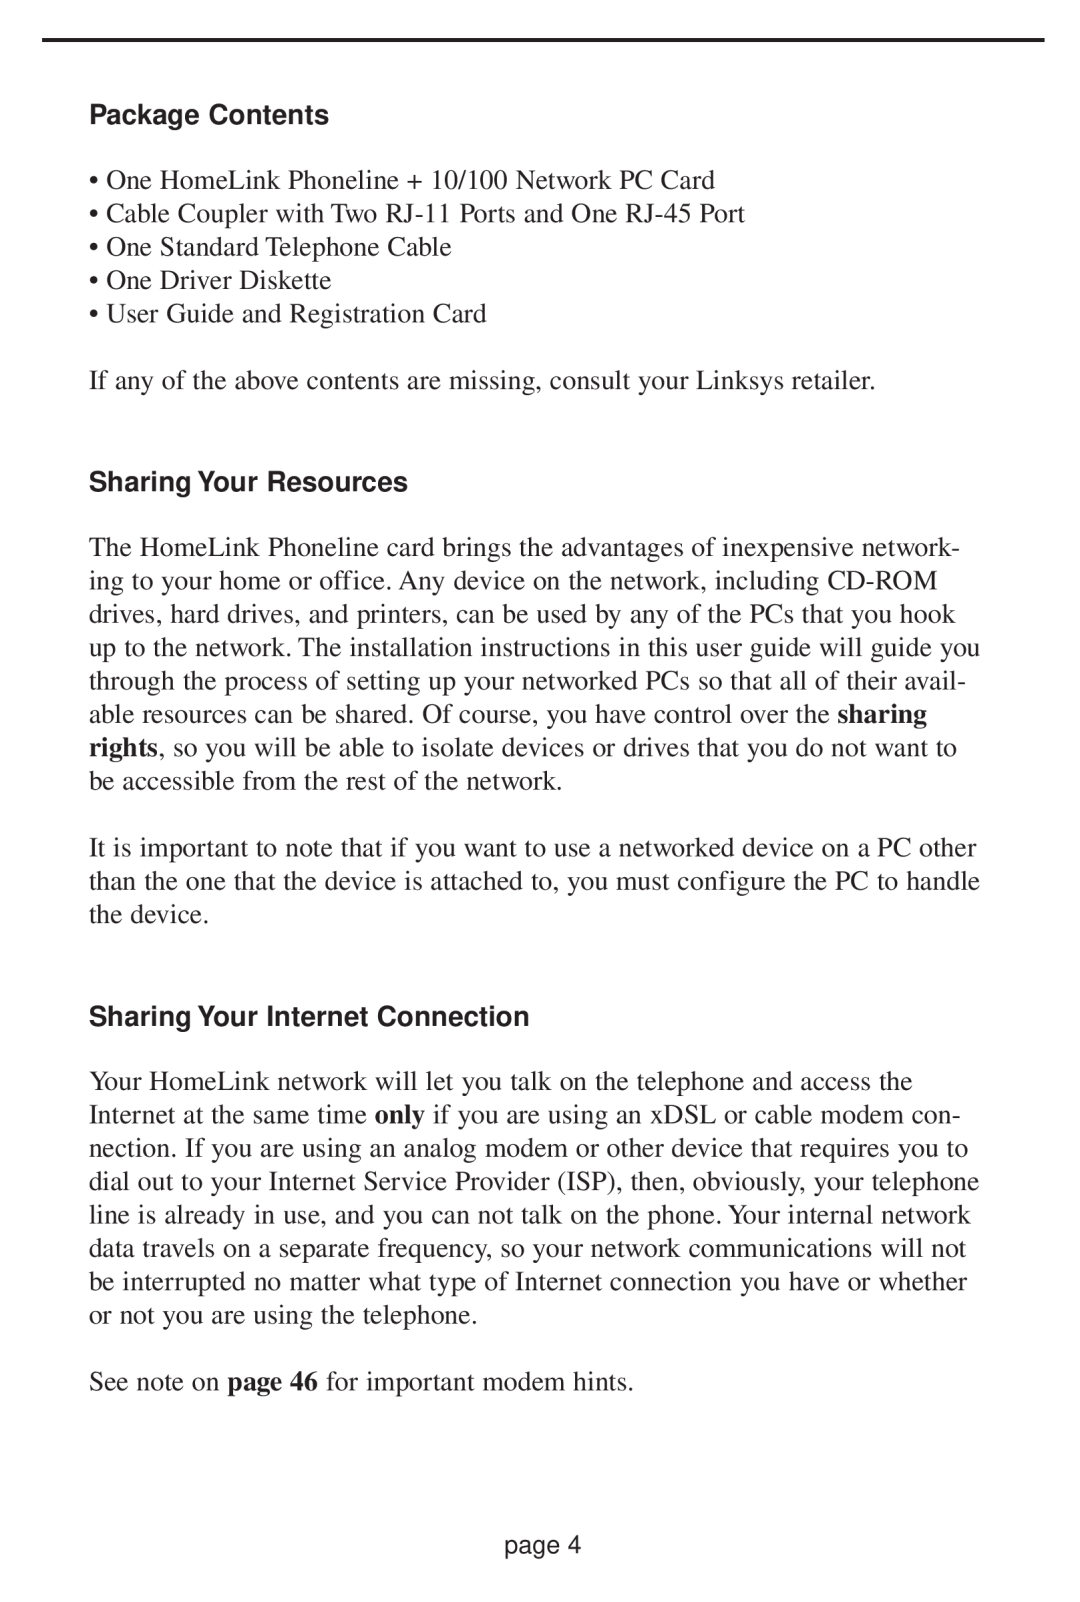 Linksys HPN100 manual Package Contents, Sharing Your Resources, Sharing Your Internet Connection 